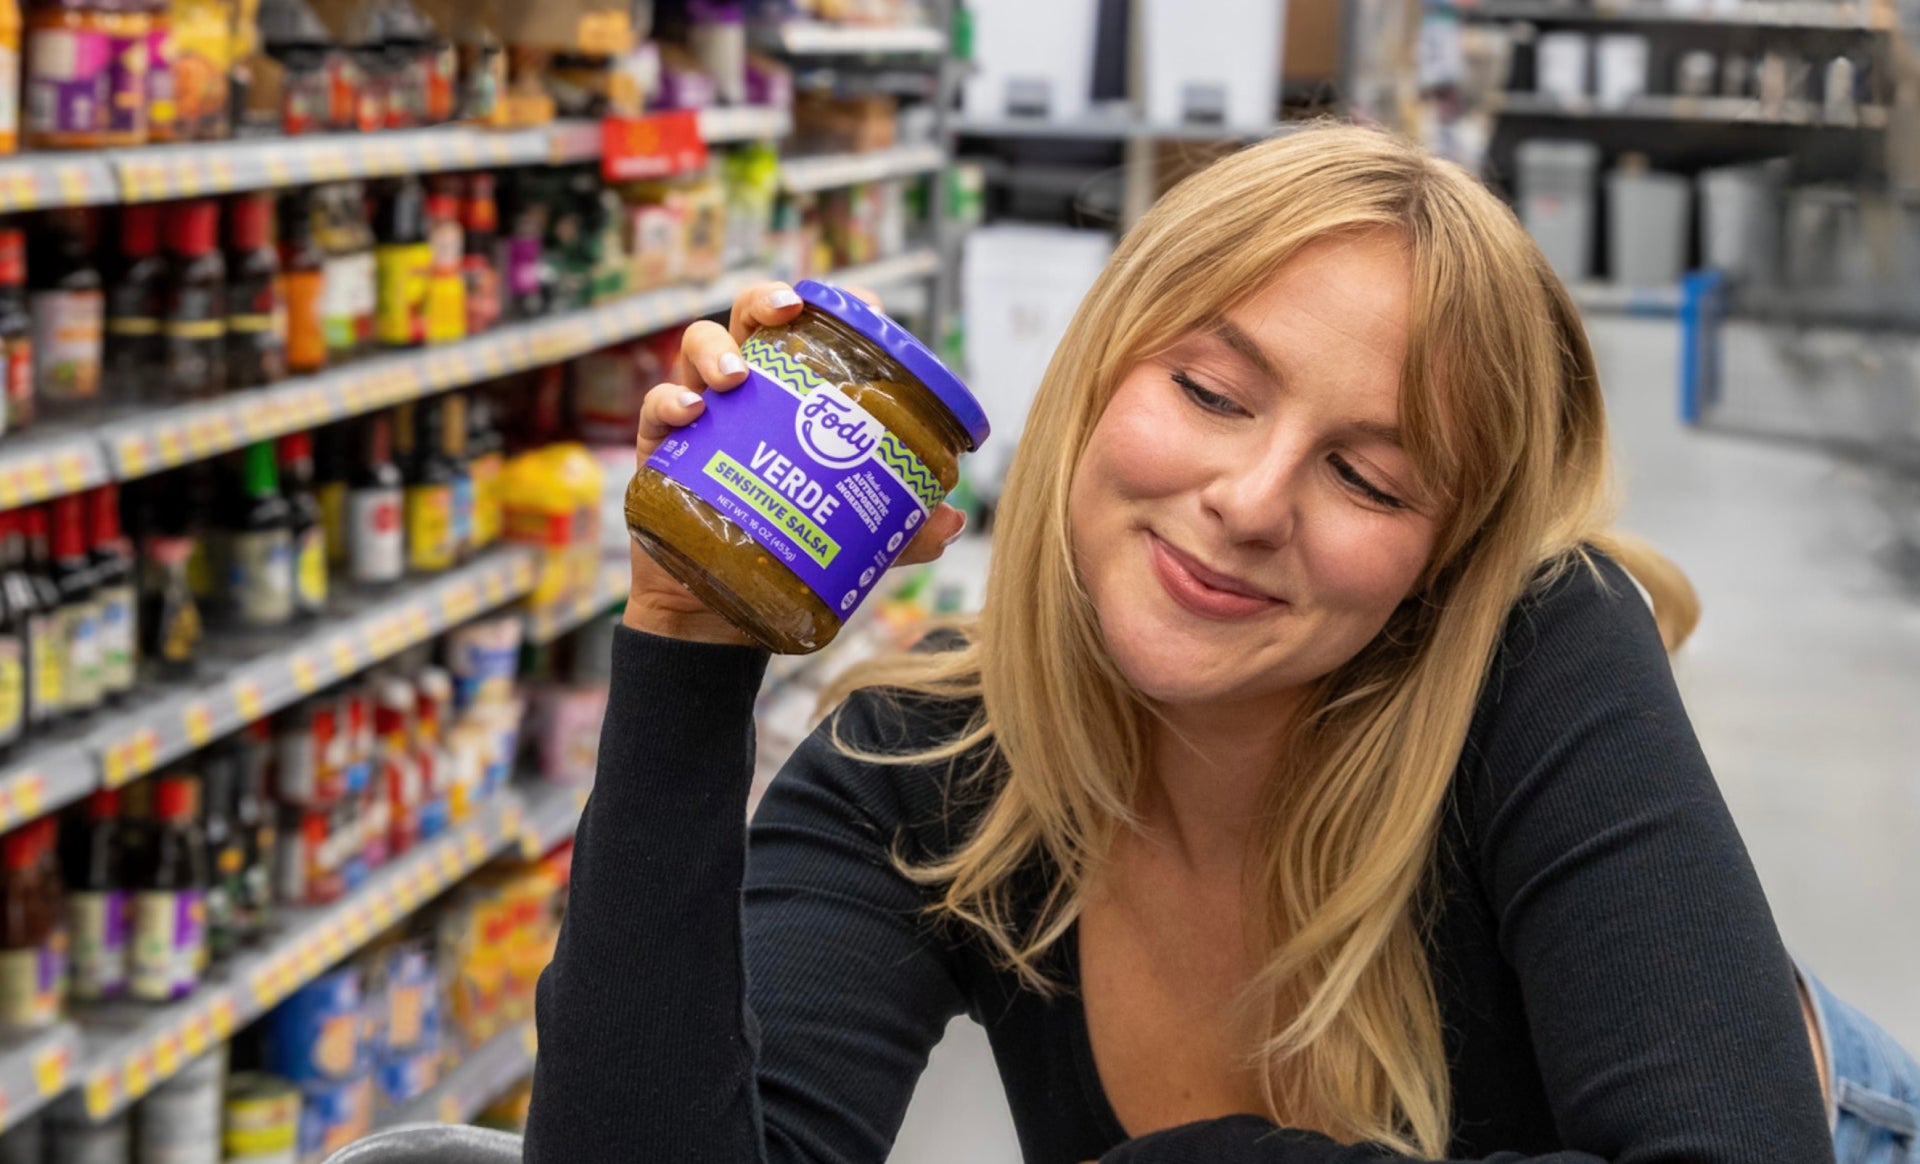 Lady in a supermarket holding a jar of Fody's Verde Sensitive Salsa